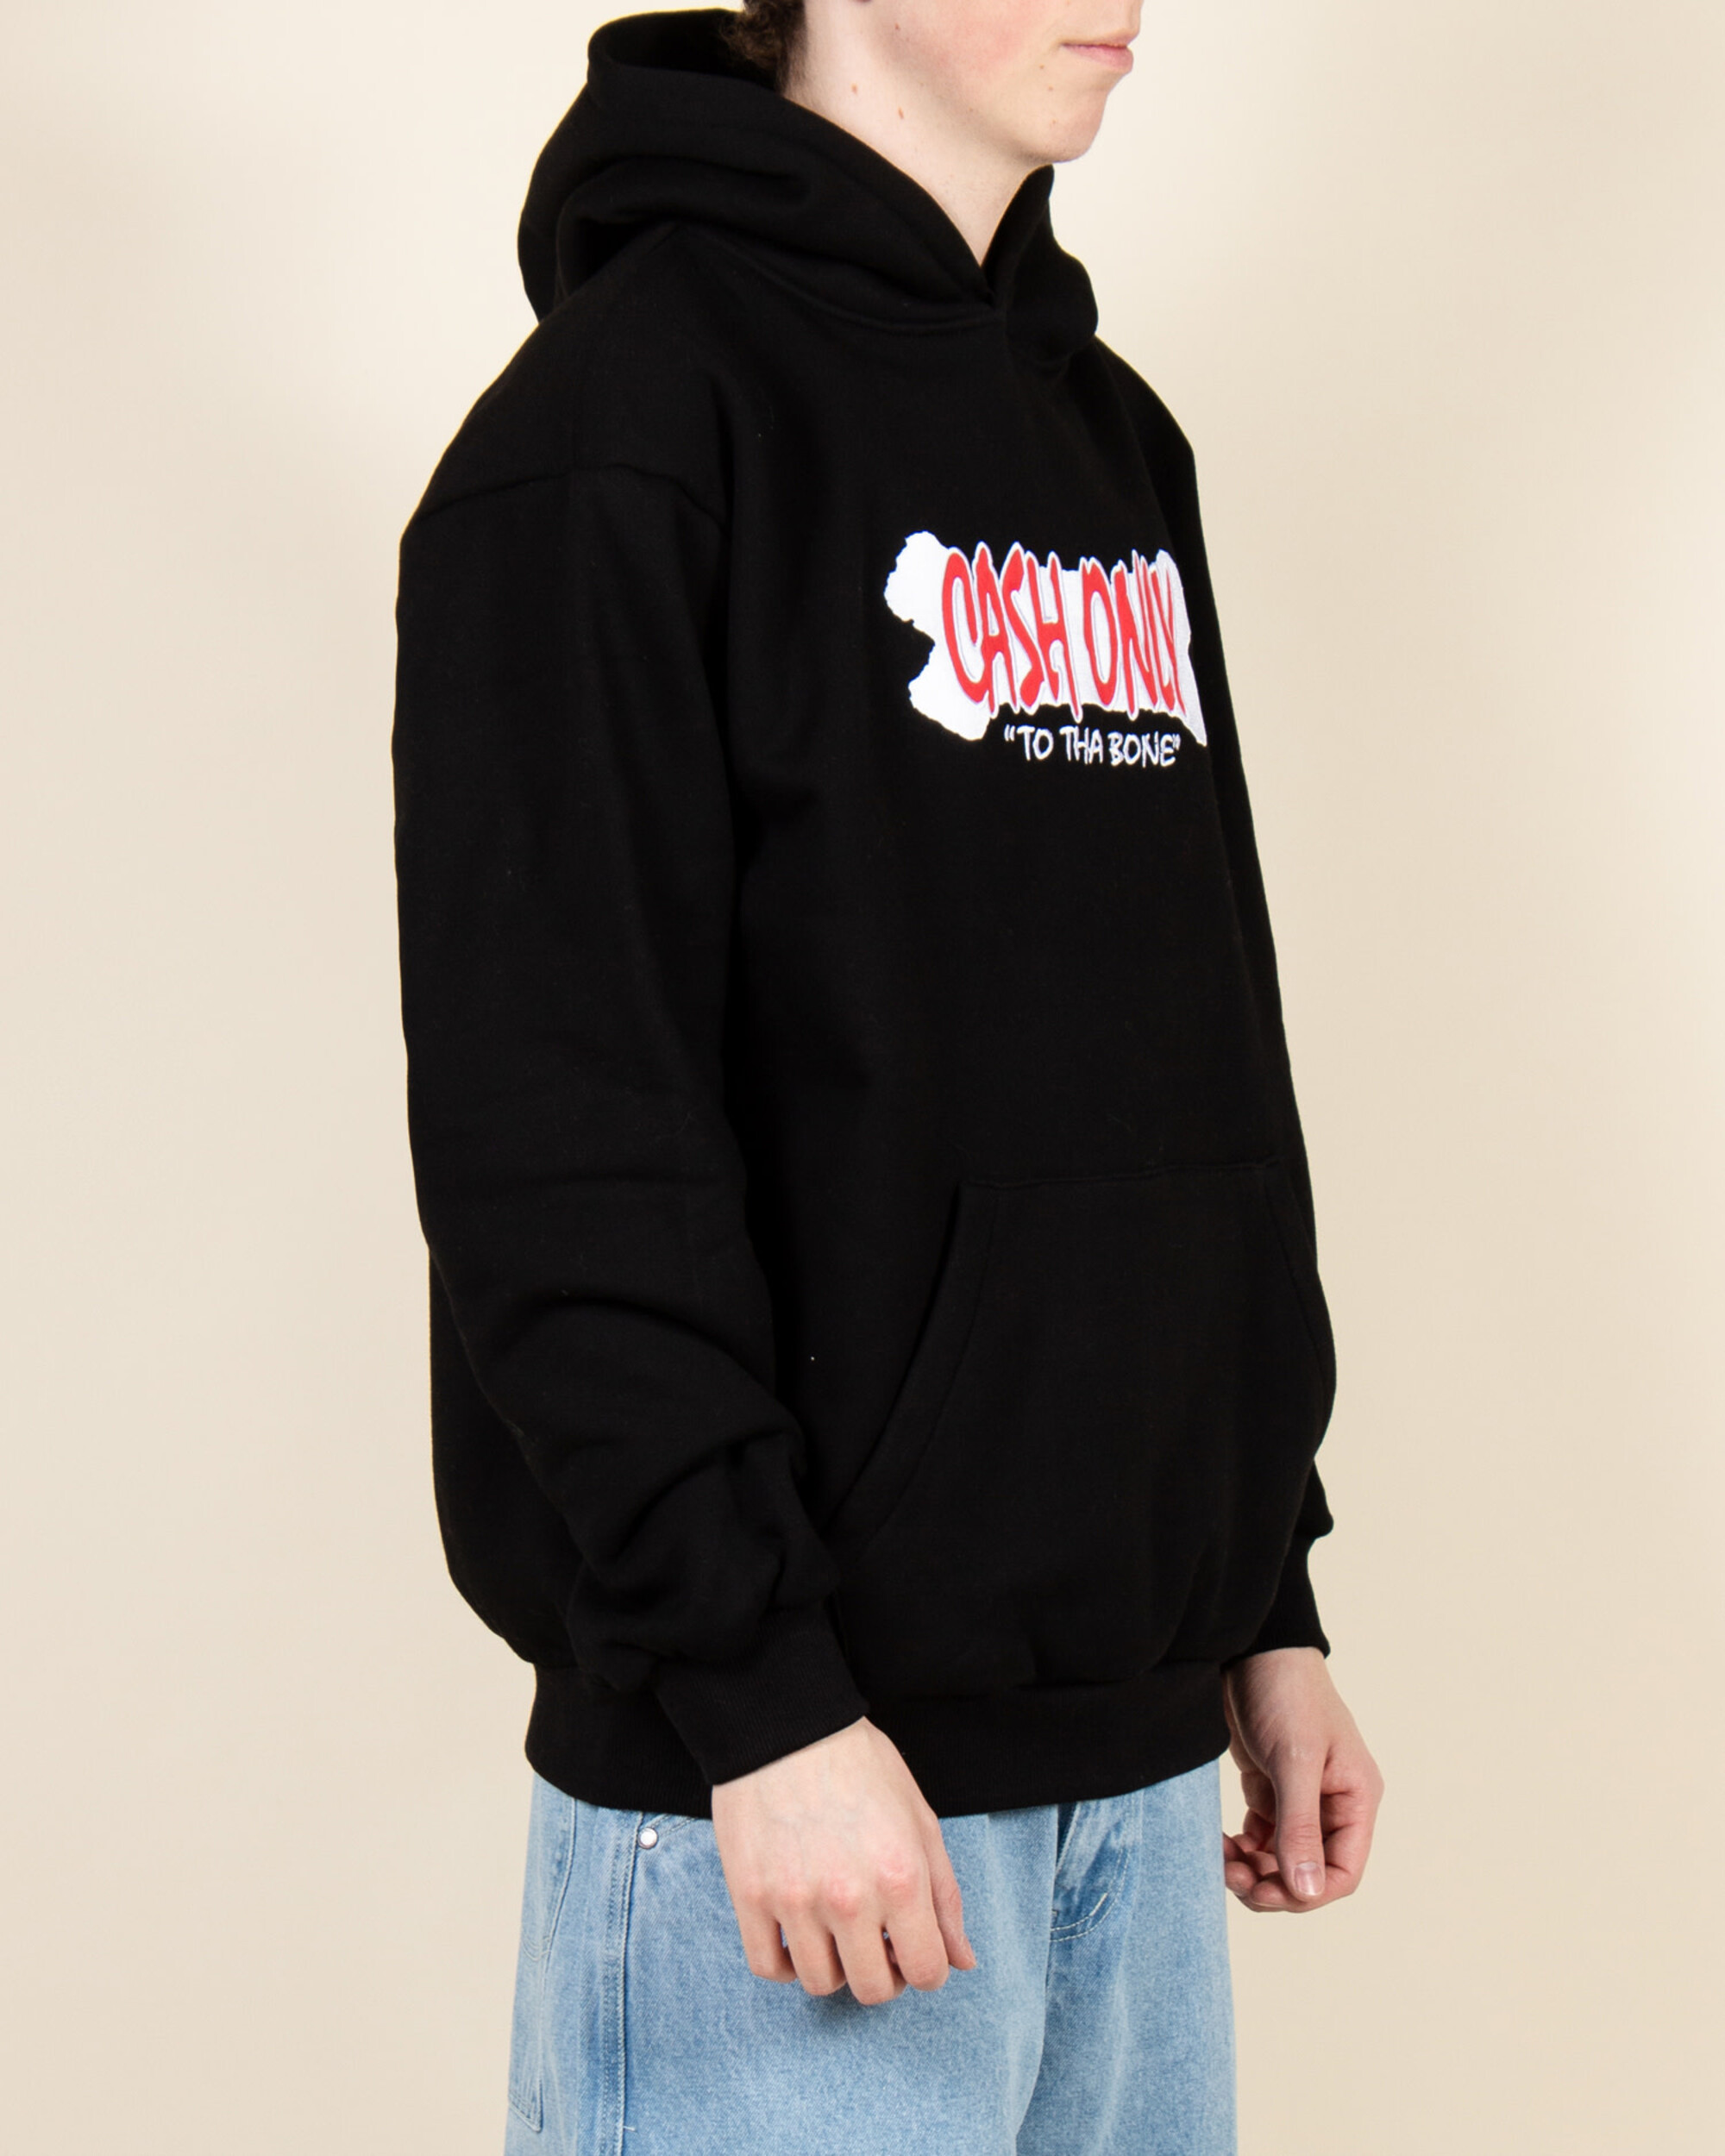 Cash Only To Tha Bone Pullover - Black